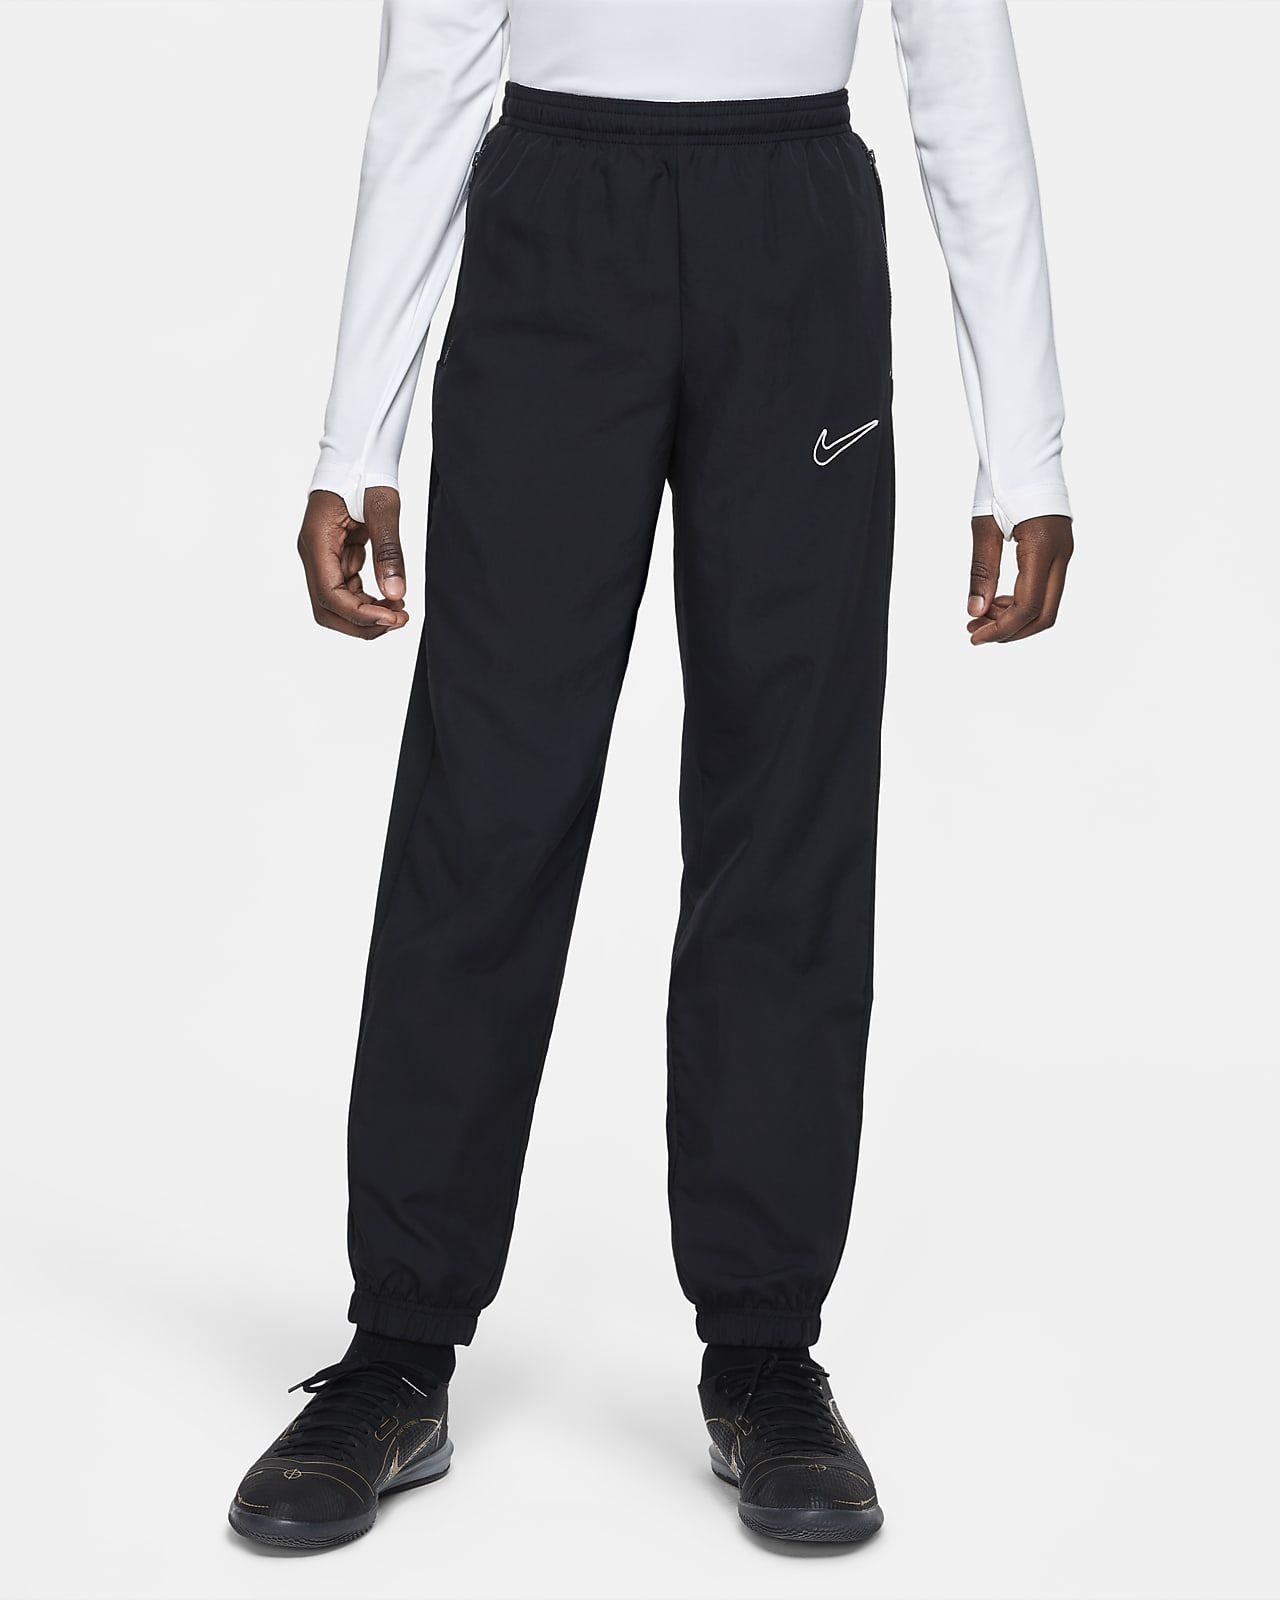 Nike Dri-FIT Academy Older Kids' Woven Football Tracksuit Bottoms (Stock)